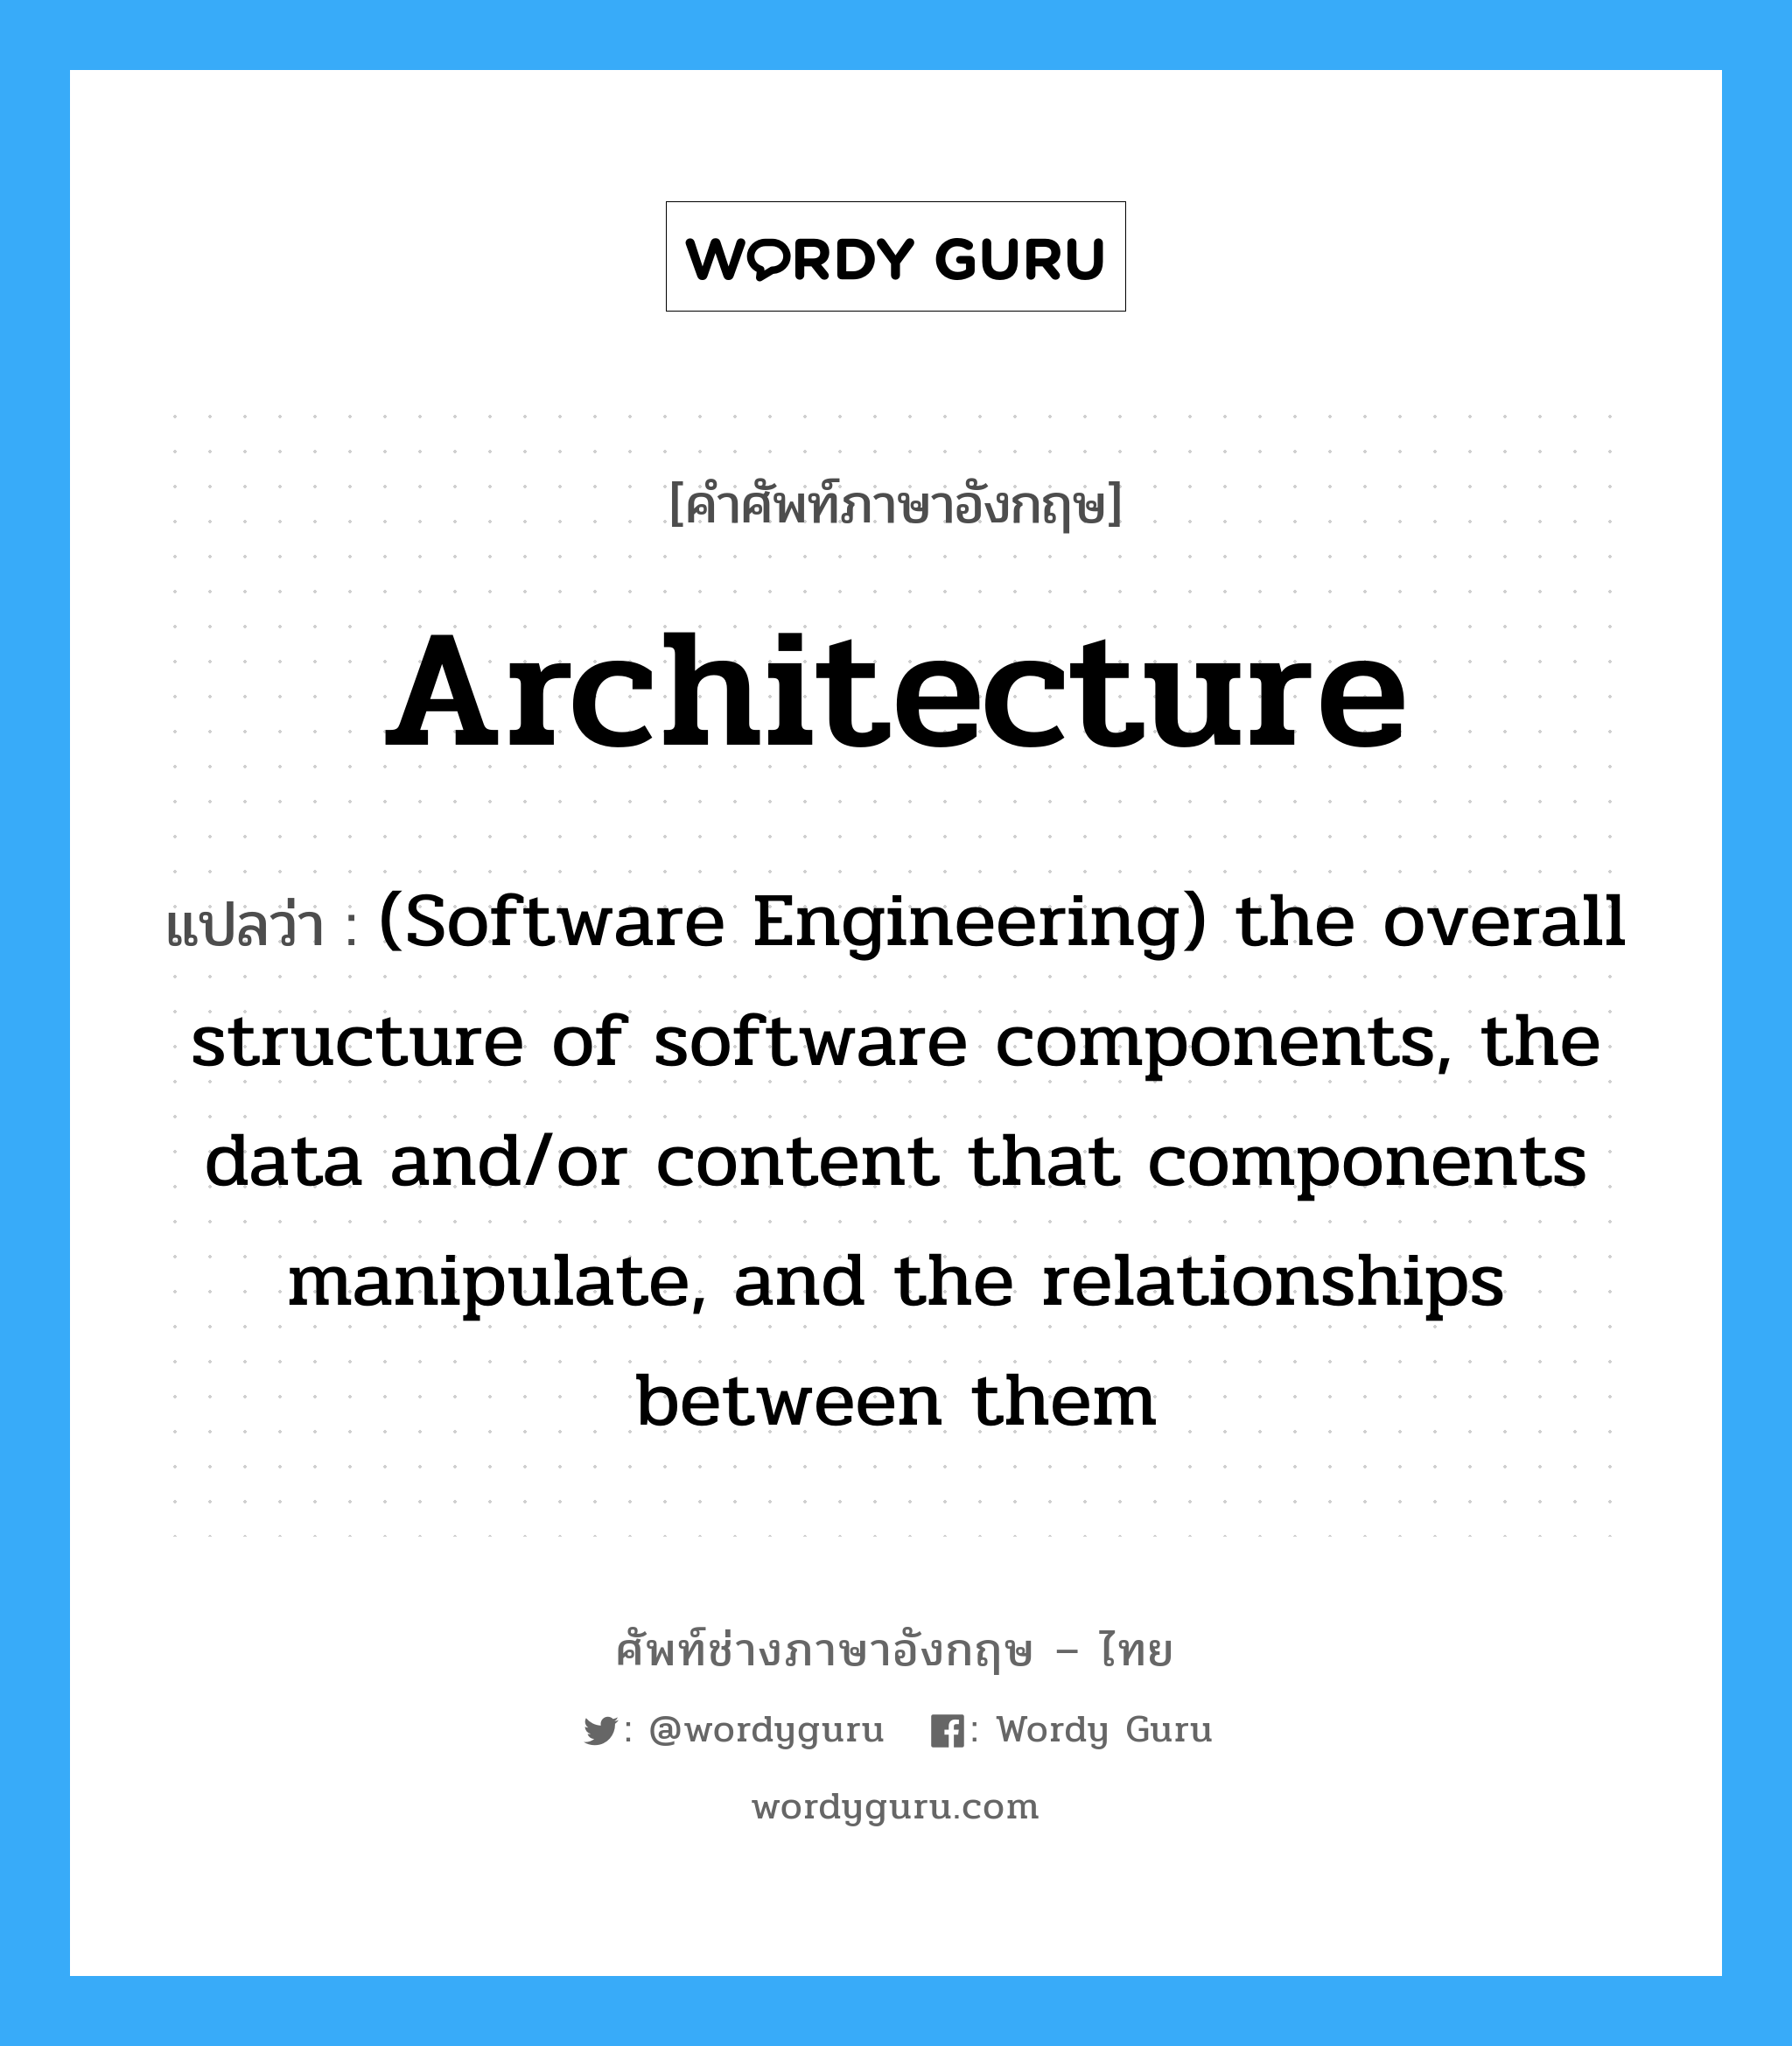 (Software Engineering) the overall structure of software components, the data and/or content that components manipulate, and the relationships between them ภาษาอังกฤษ?, คำศัพท์ช่างภาษาอังกฤษ - ไทย (Software Engineering) the overall structure of software components, the data and/or content that components manipulate, and the relationships between them คำศัพท์ภาษาอังกฤษ (Software Engineering) the overall structure of software components, the data and/or content that components manipulate, and the relationships between them แปลว่า Architecture